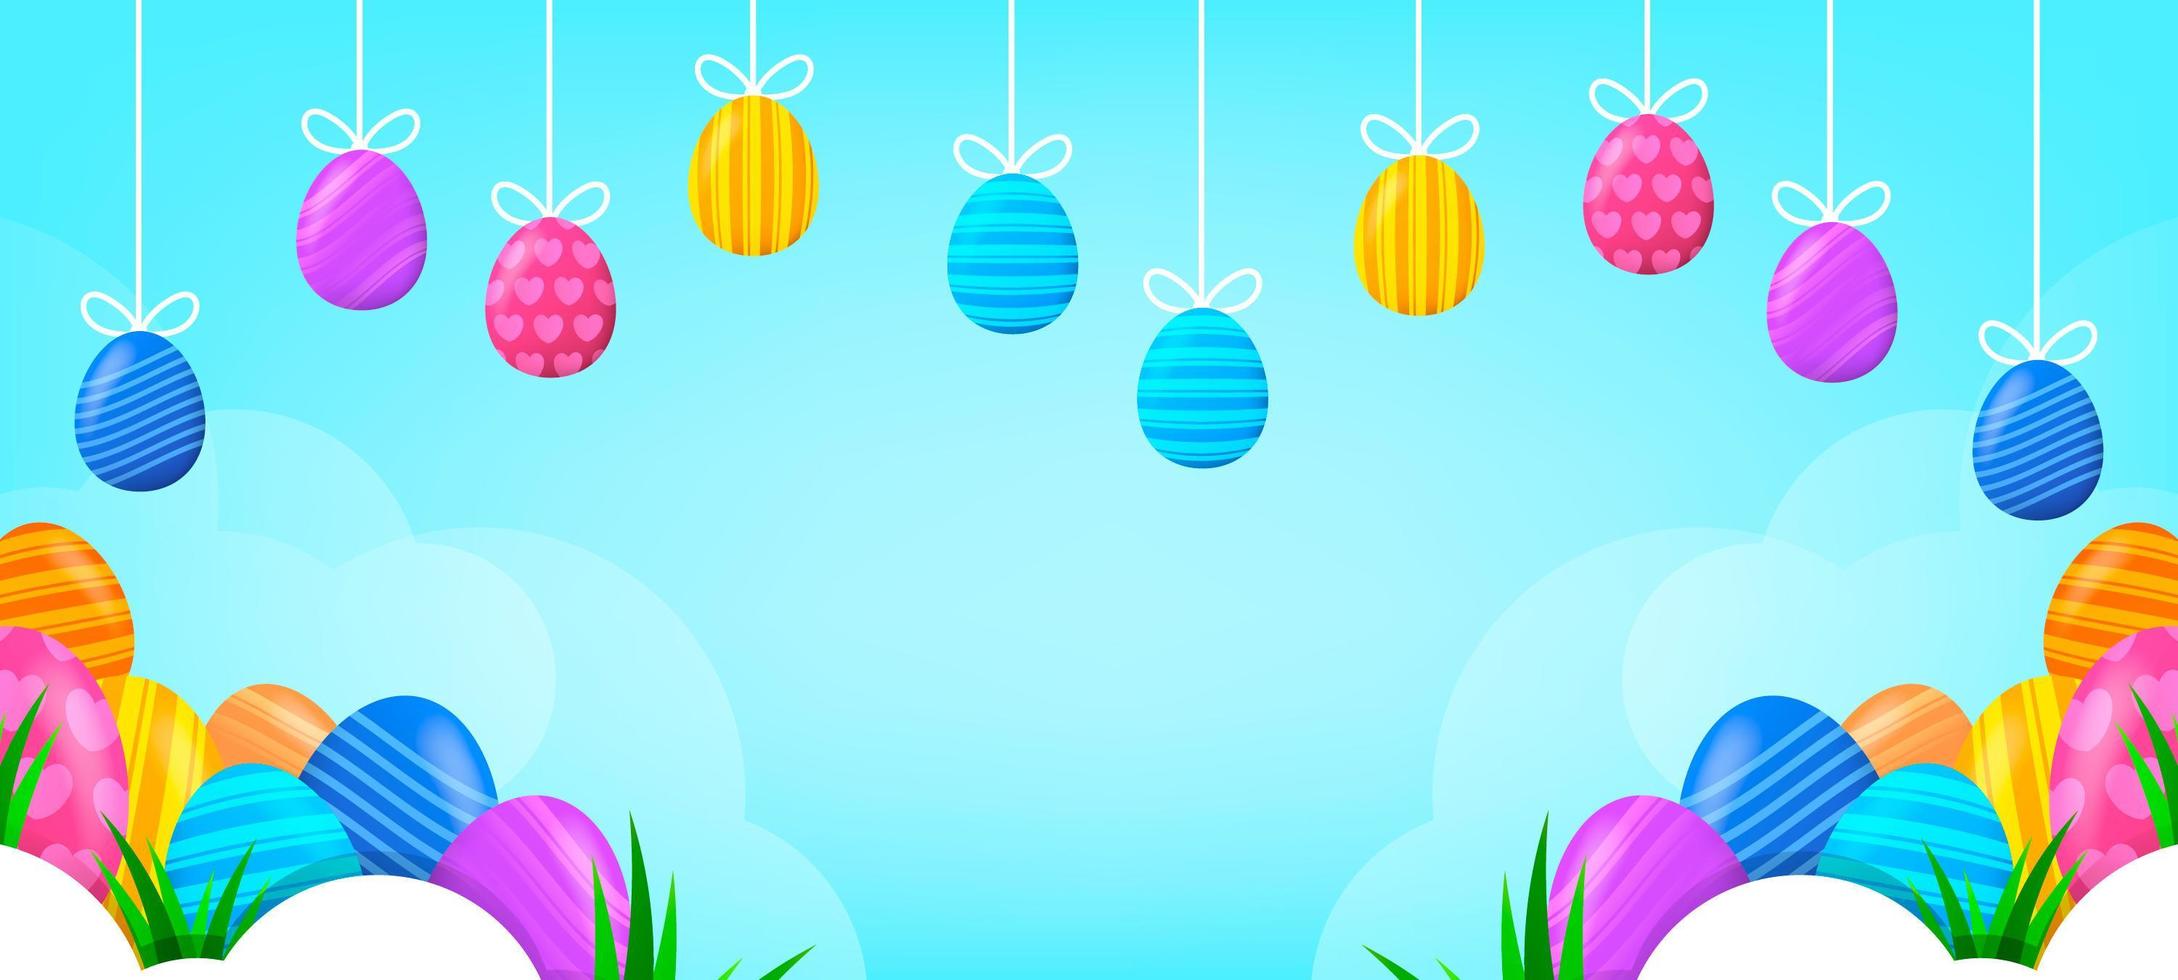 Cute Colorful Easter Eggs Background vector